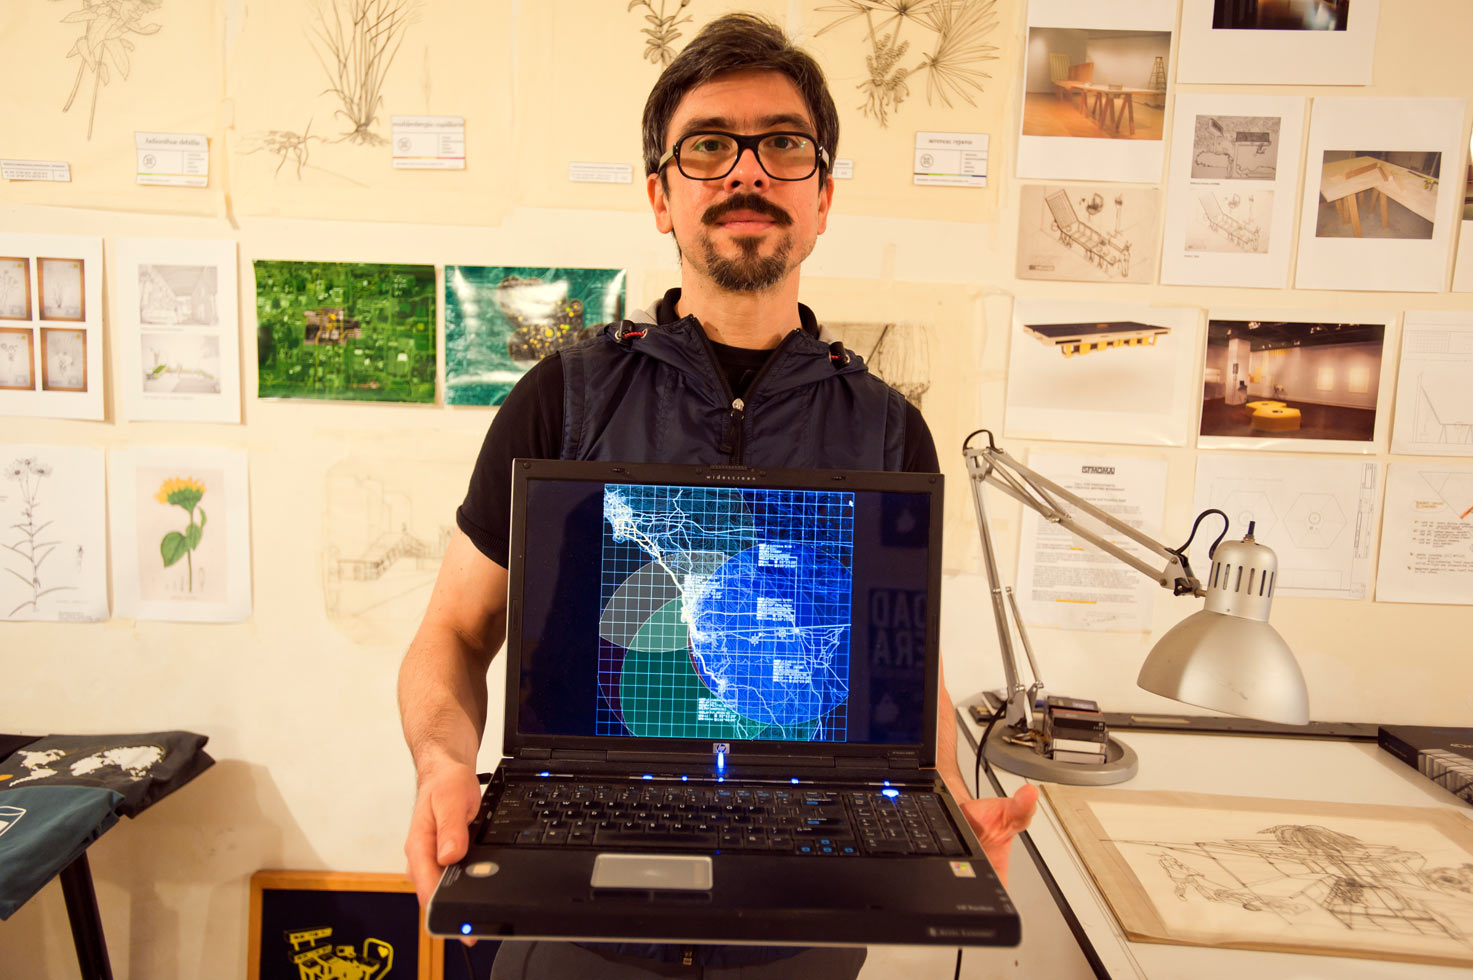 Raul Cardenaz, a conceptual artist, founder of Torolab, in his studio. He tracks border movements with complicated computer programs.